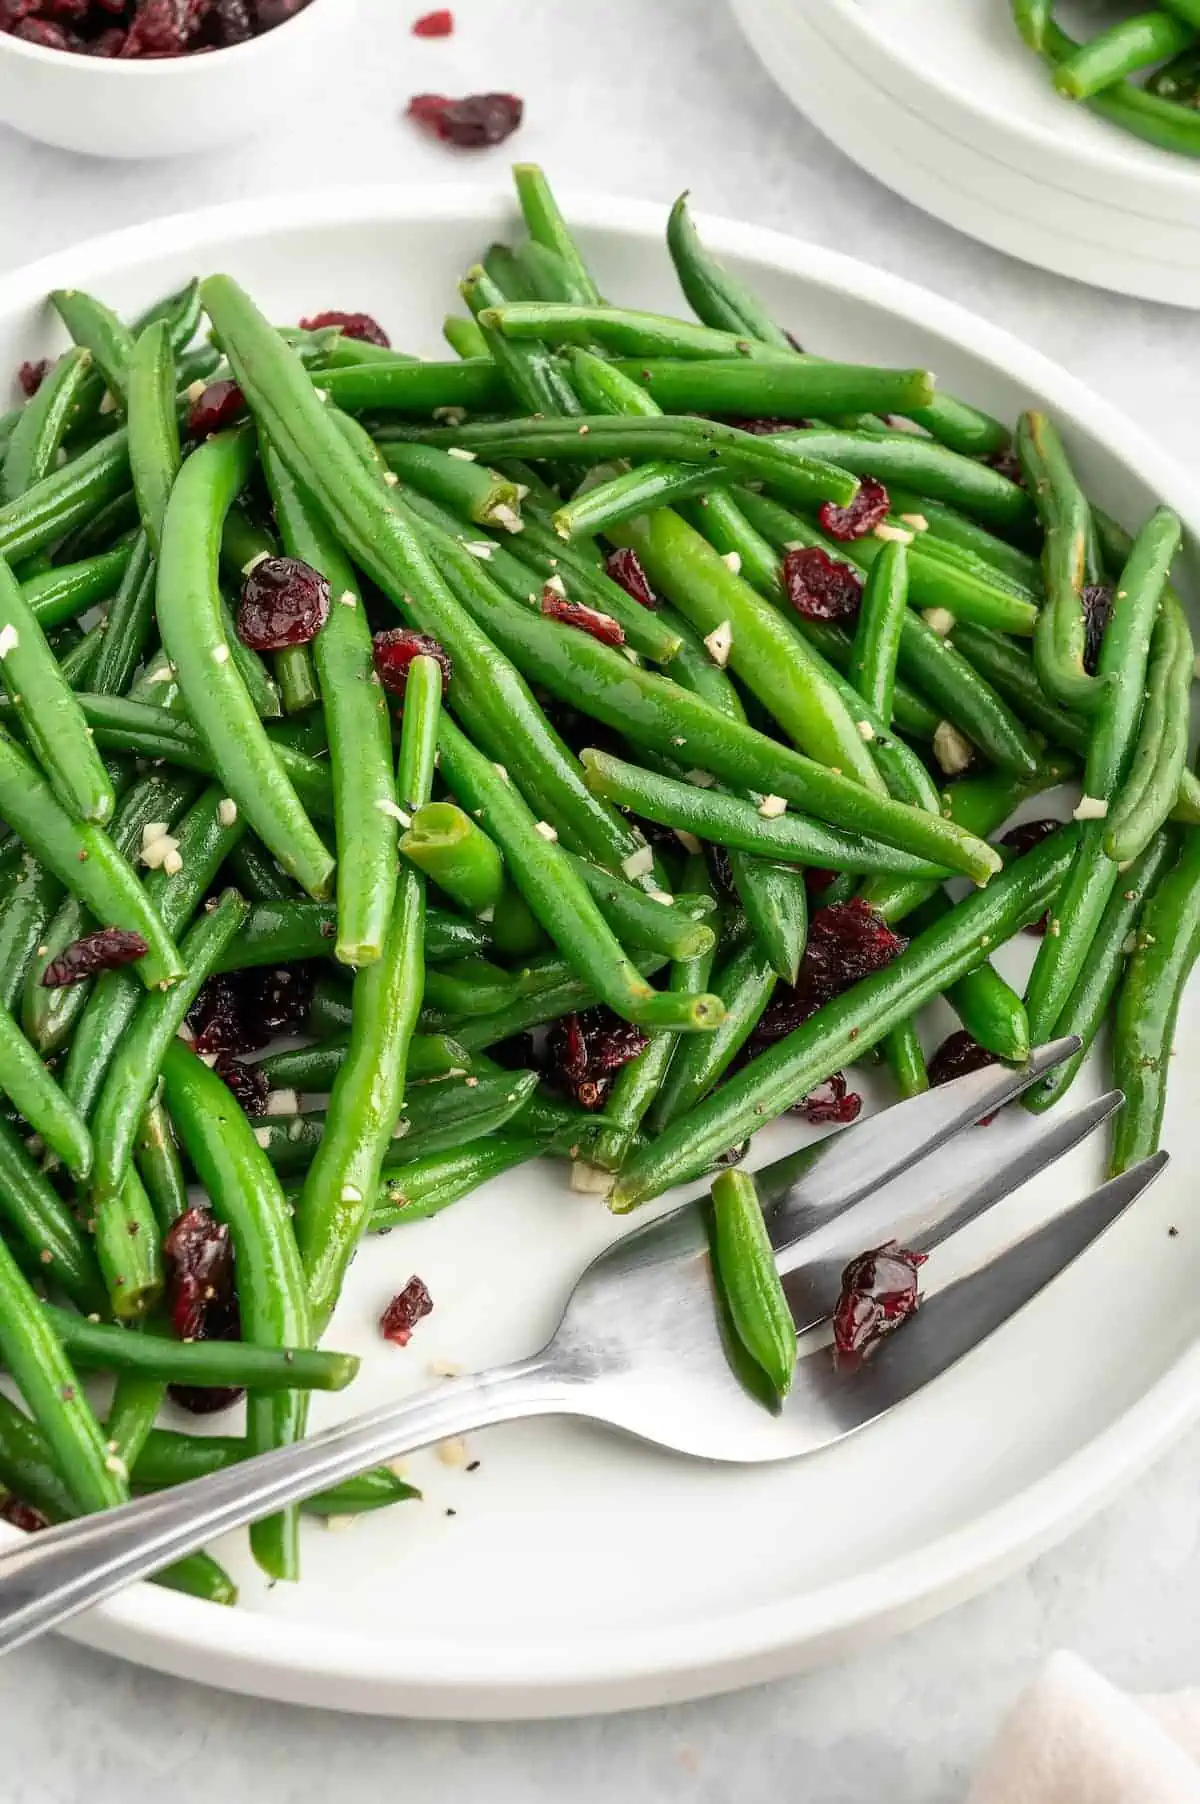 A plate of garlic green beans with cranberries on a white plate with a fork.